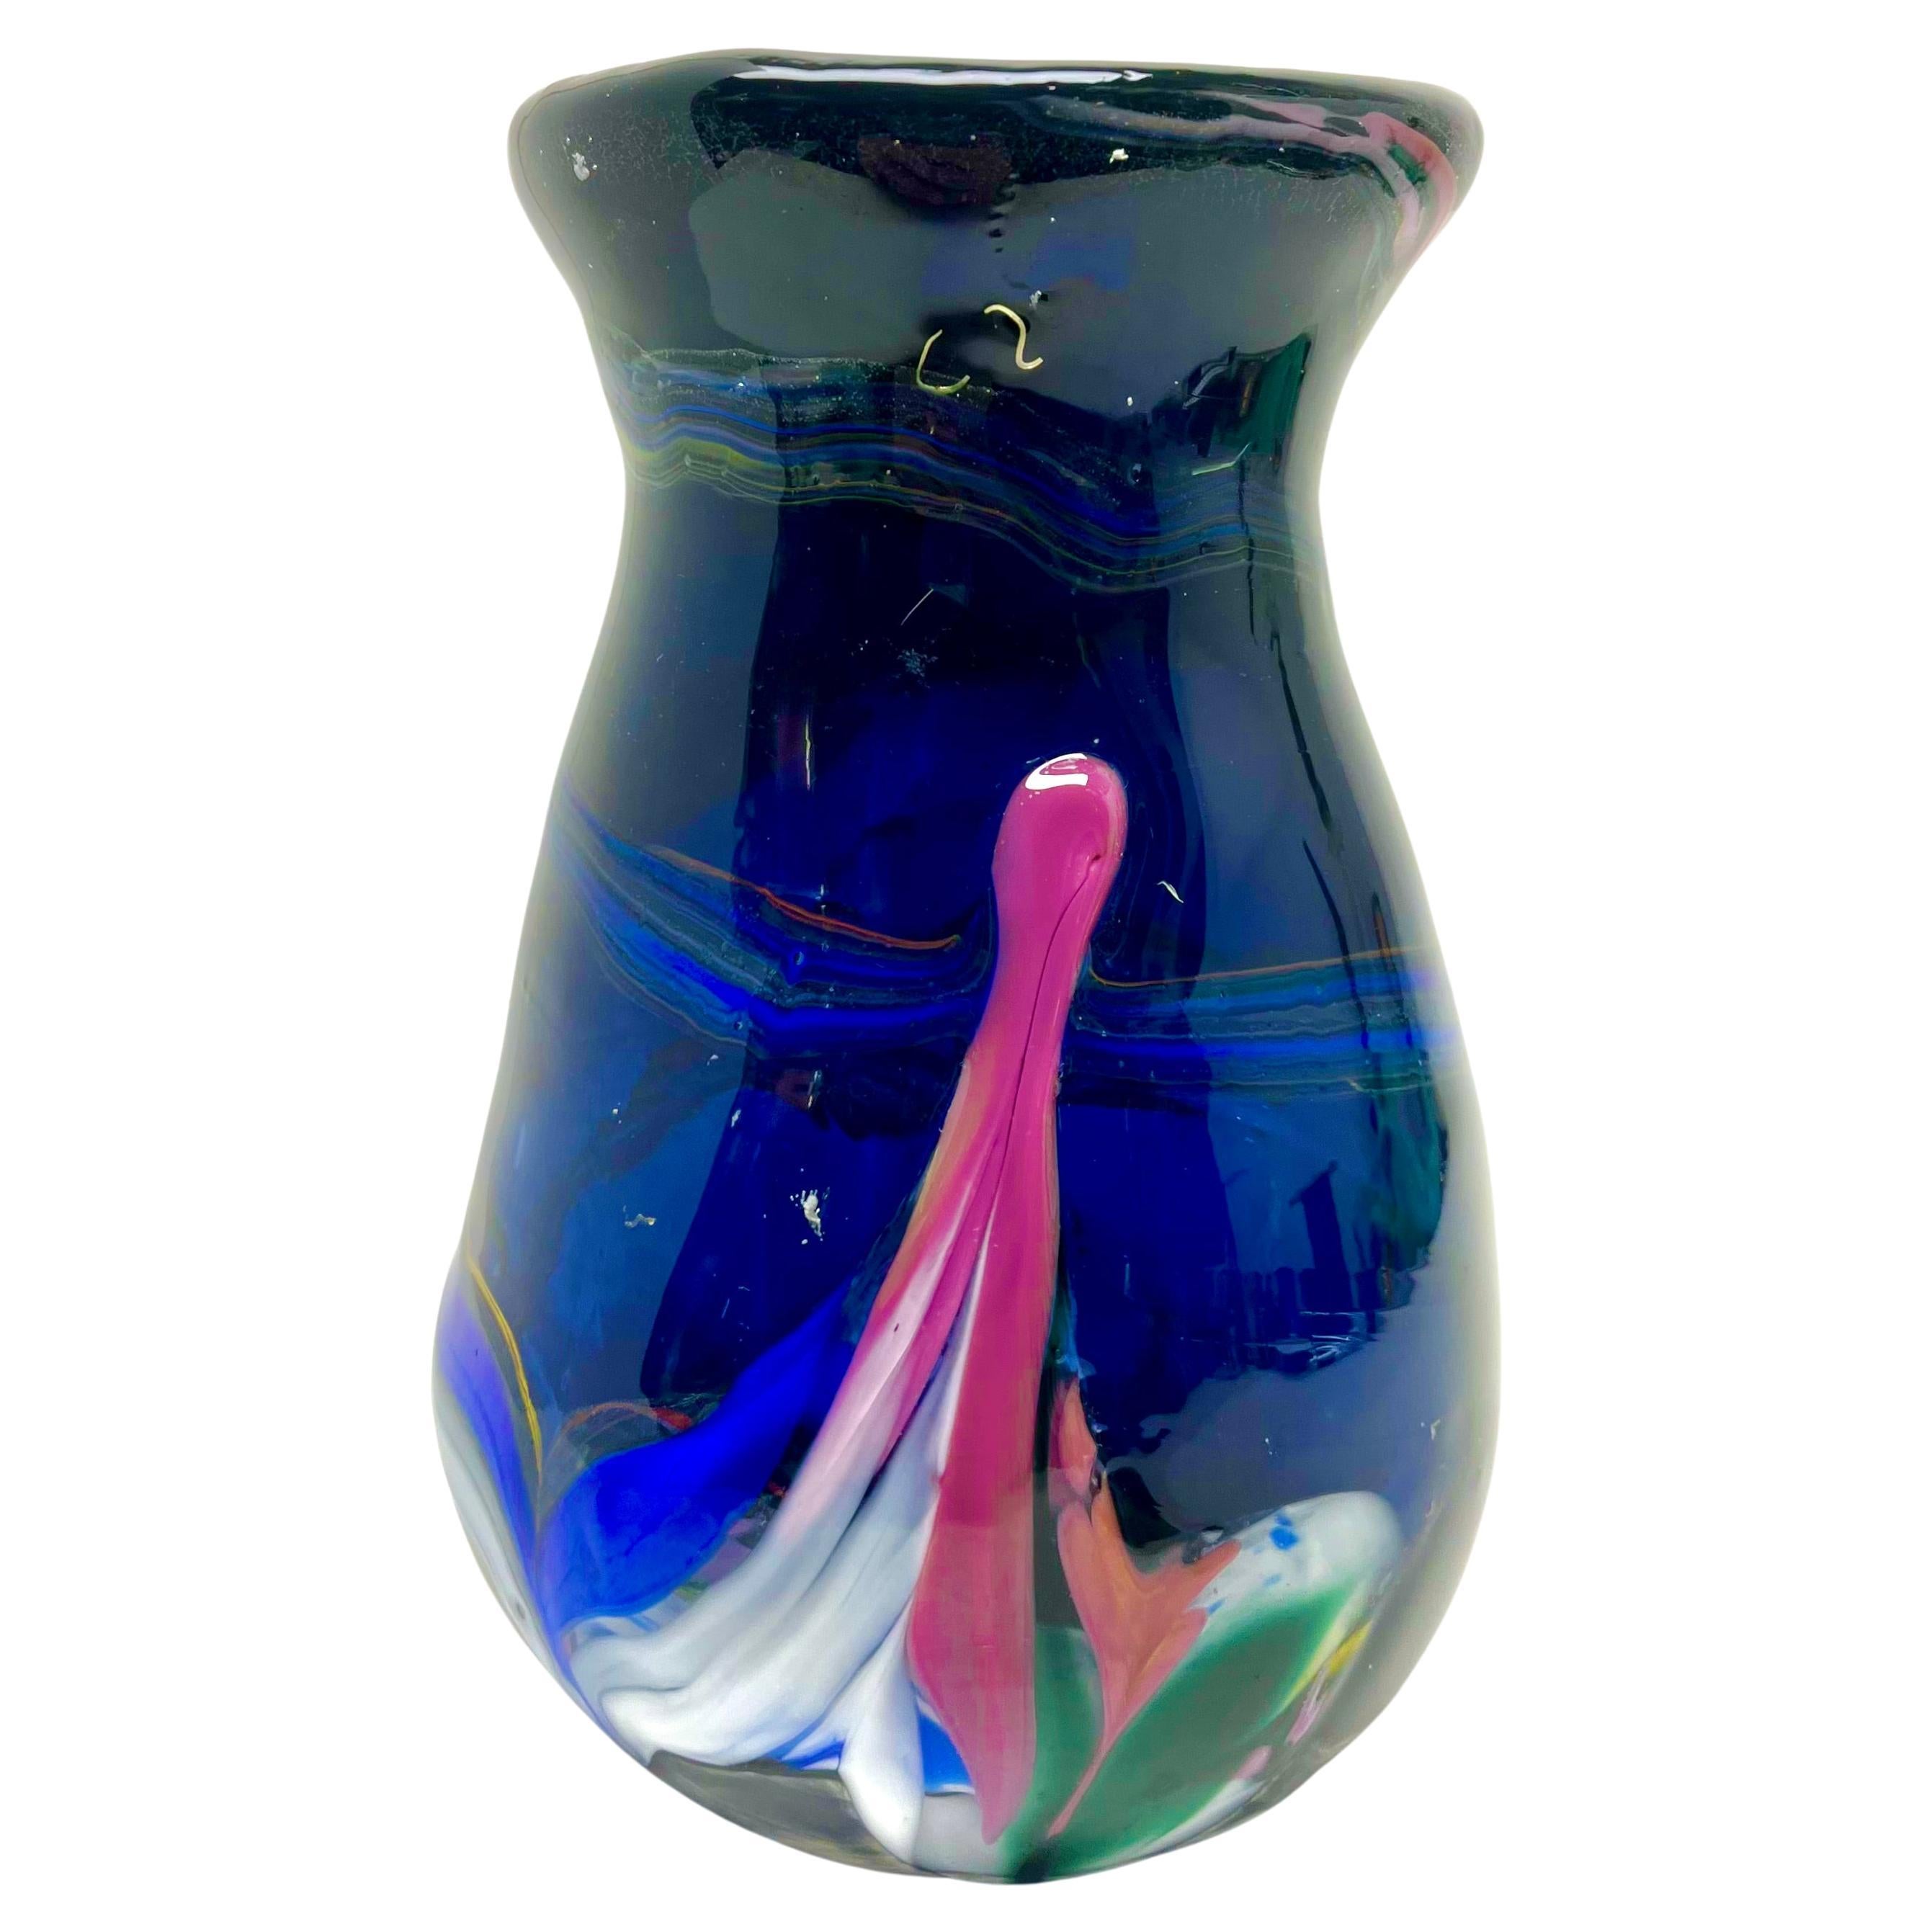 Vsl Studio Glass Signed Vase with Embedded Color the Piece Is Unique